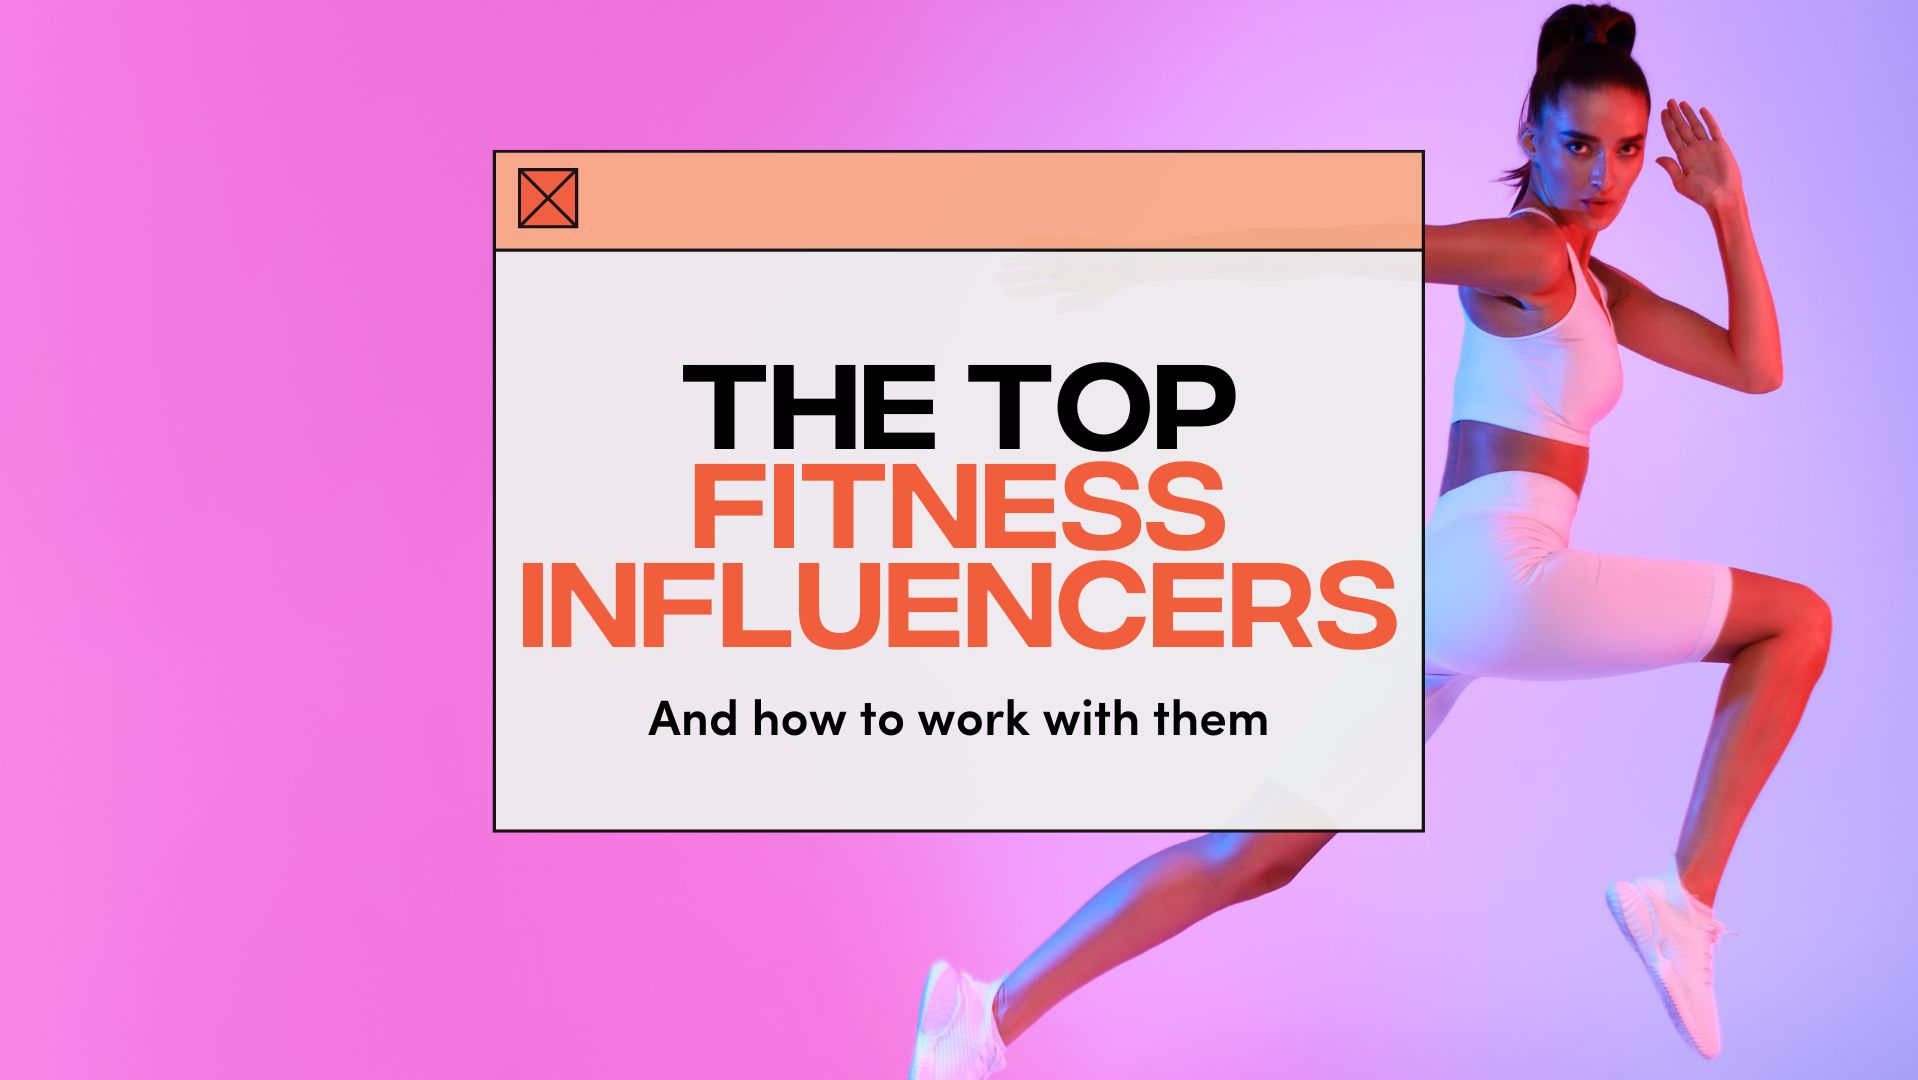 The Top Fitness Influencers - And How to Work With Them